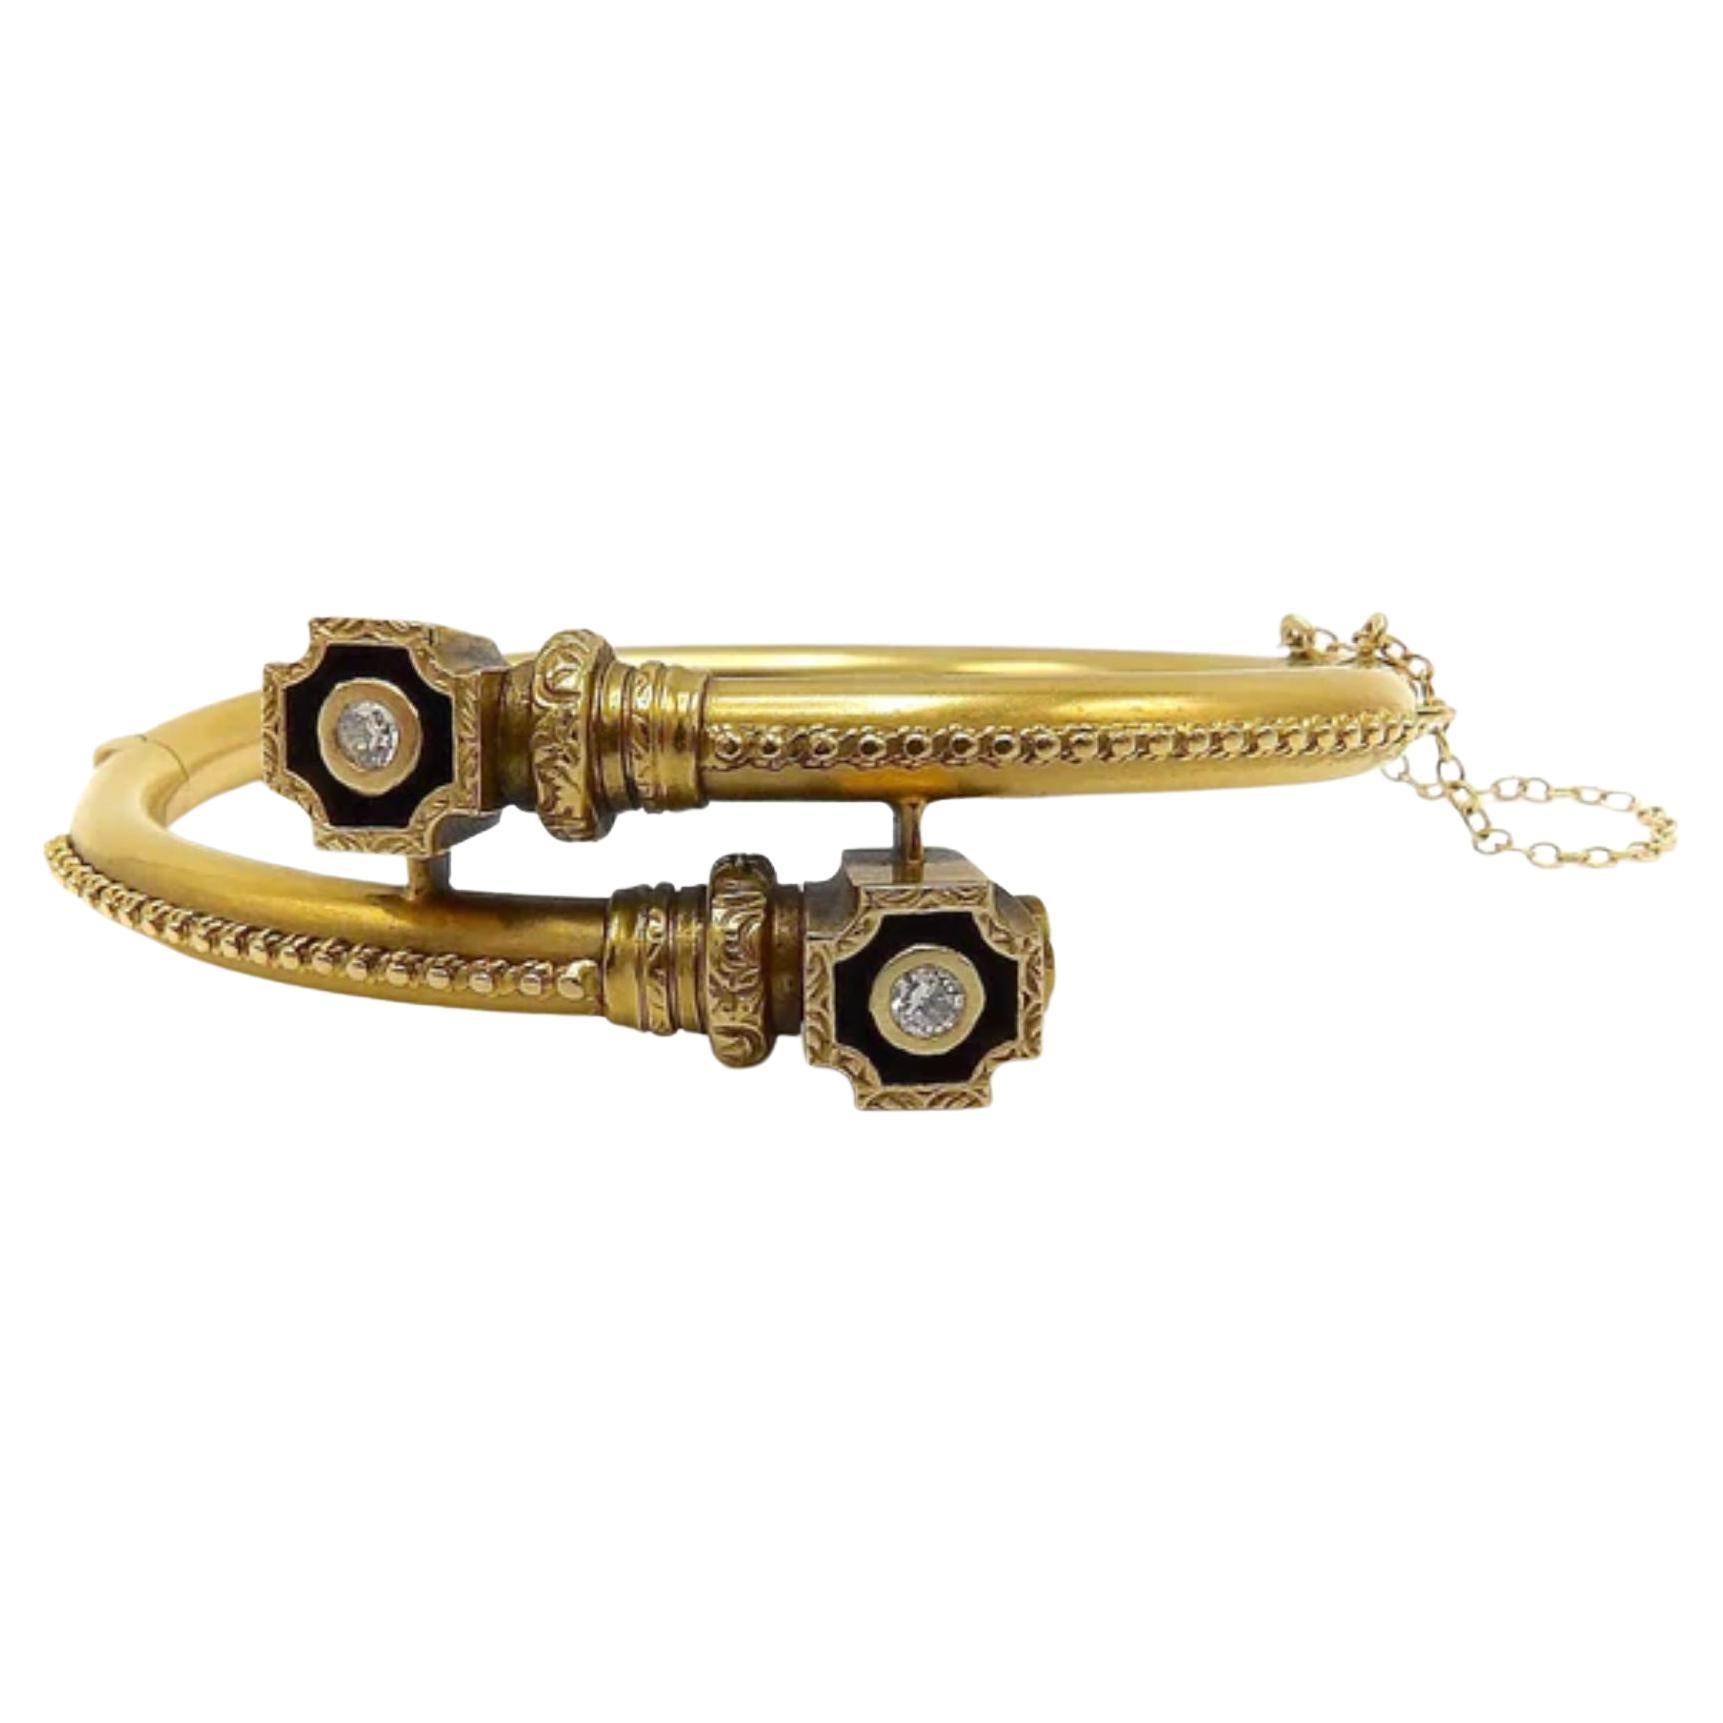 This is a stunning Etruscan Revival bracelet in 14k gold with diamonds and exquisite gold detailing. It features a bypass design with decorative lines of beaded gold granulation that lead up to a crossed shaped shadow box. Inside are bezel set